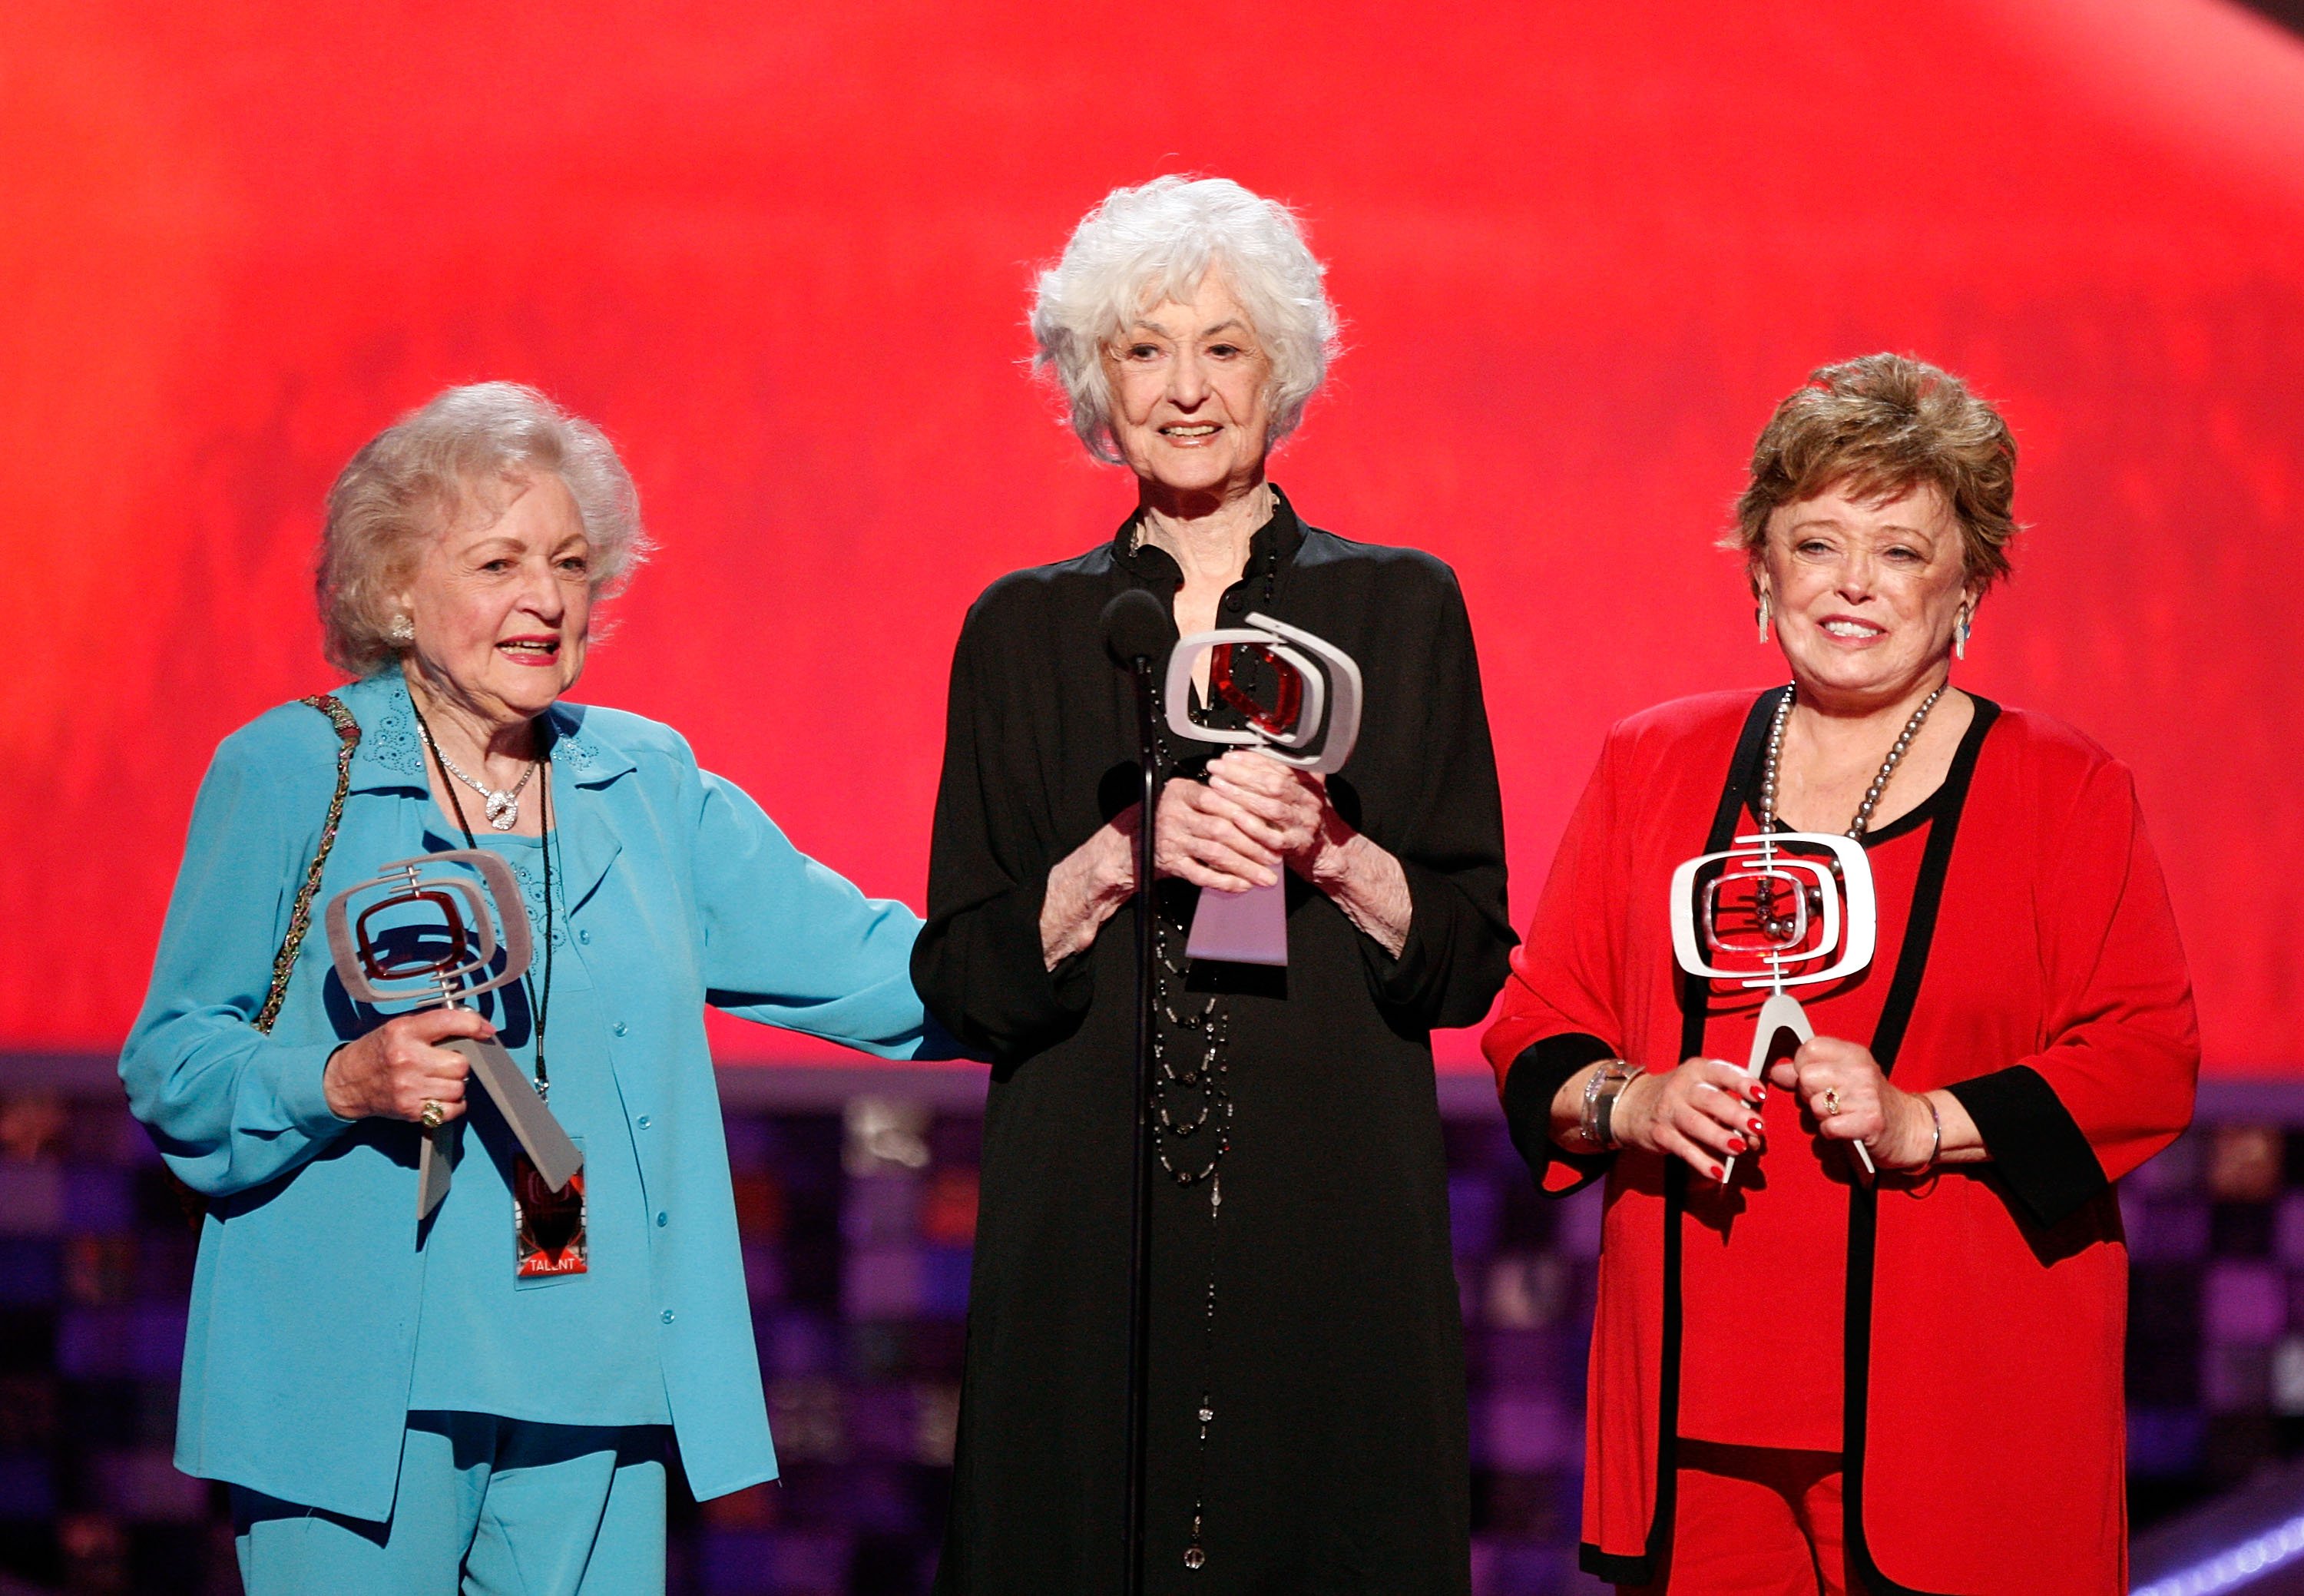 Betty White, Bea Arthur, and Rue McClanahan received the Pop Culture Award at the TV Land Awards in Santa Monica, California on June 8, 2008 | Photo: Getty Images